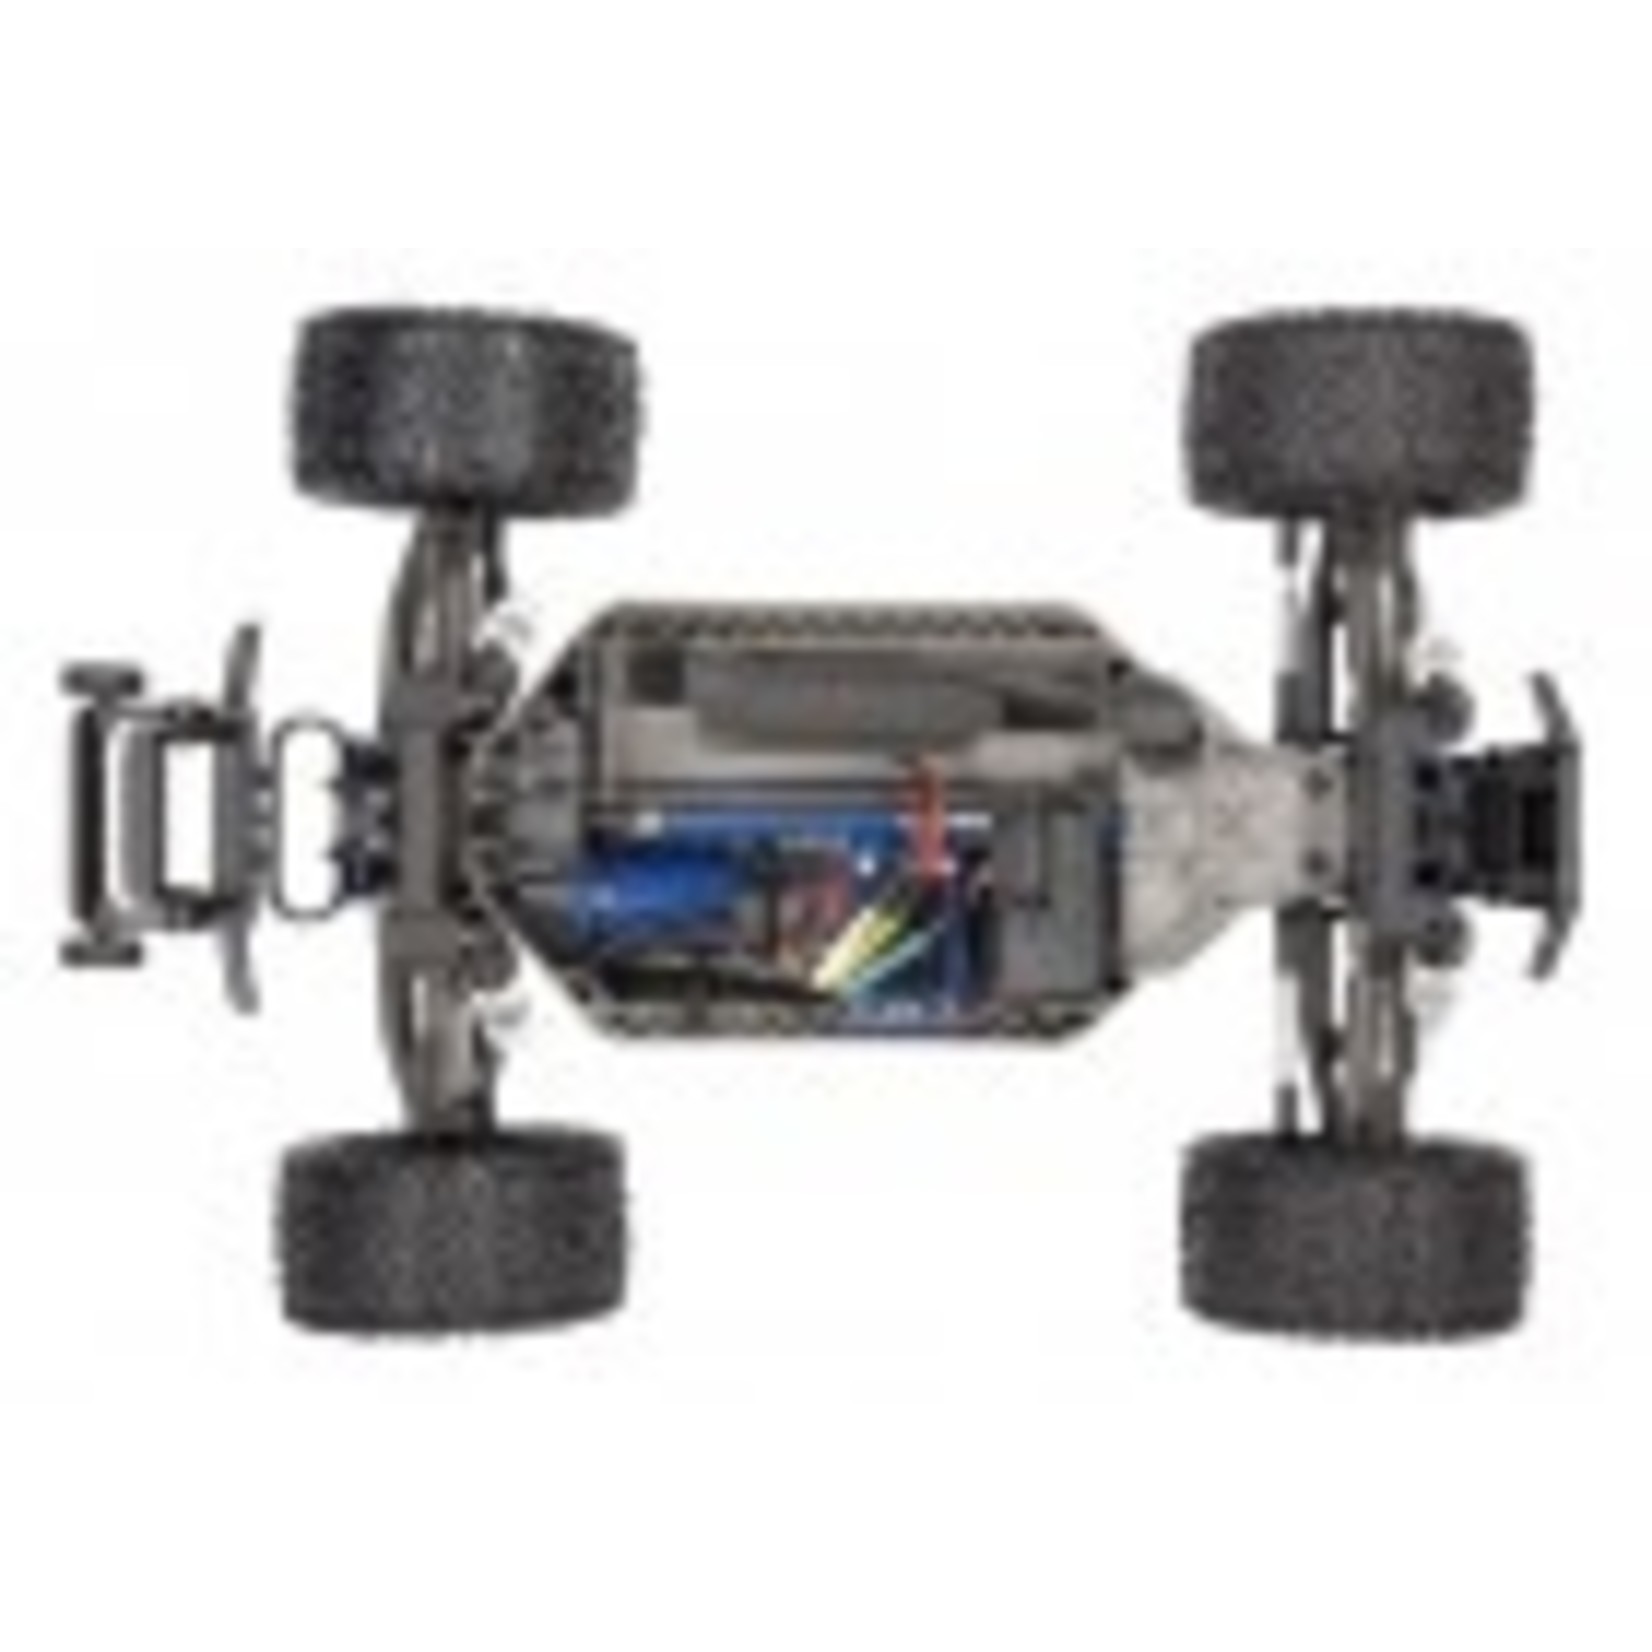 TRAXXAS Rustler® 4X4 VXL:  1/10 Scale Stadium Truck with TQi Traxxas Link™ Enabled 2.4GHz Radio System & Traxxas Stability Management (TSM)®